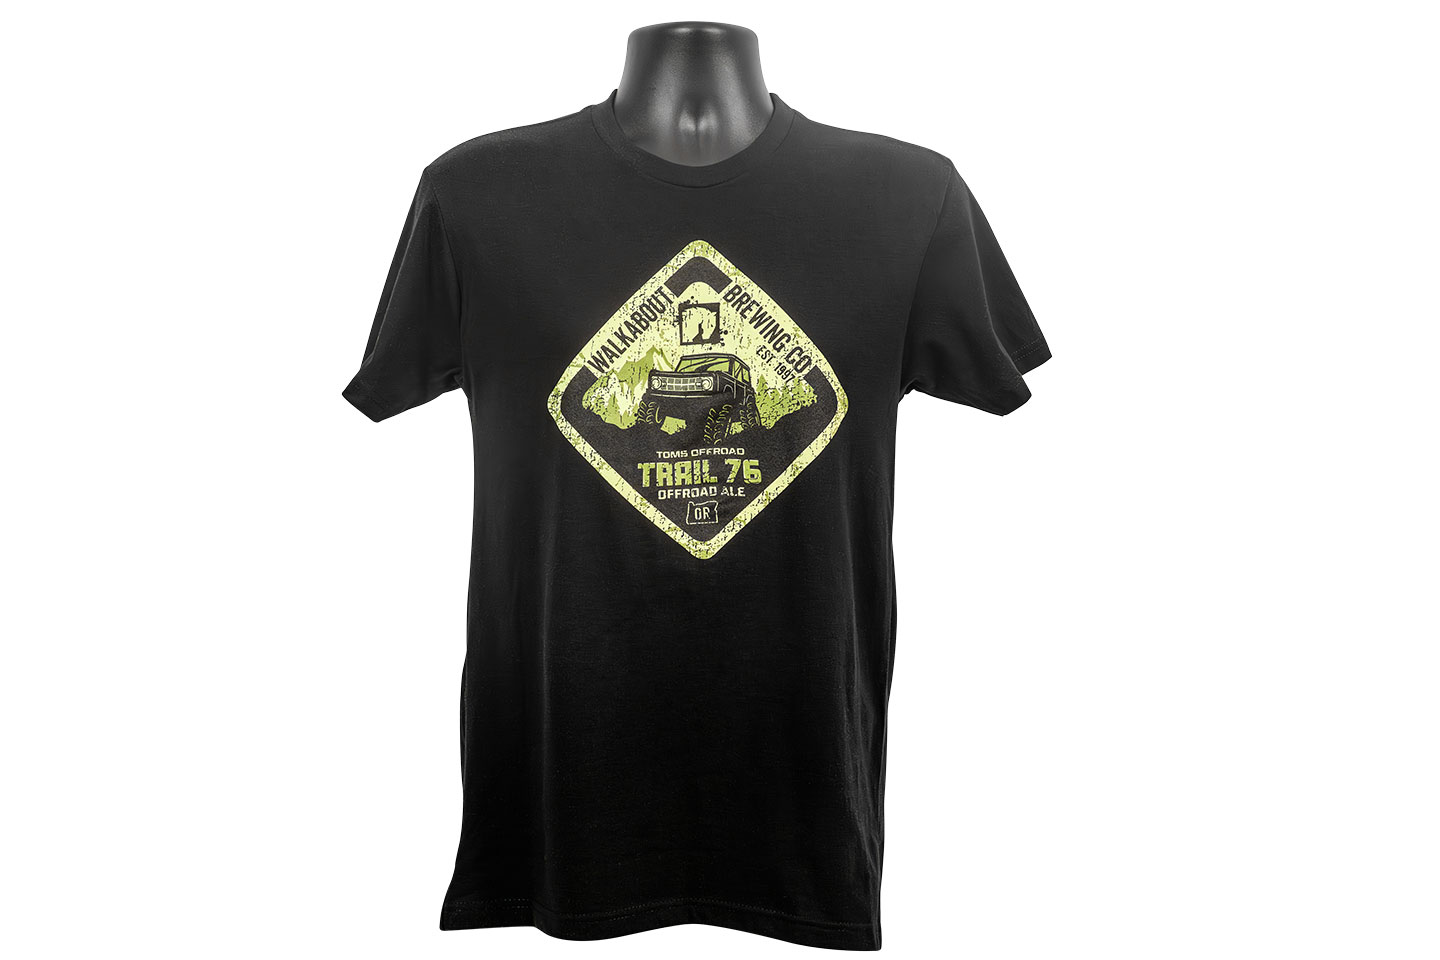 TOMS OFFROAD Walkabout Brewing Trail 76 Offroad Ale T-Shirt - Black